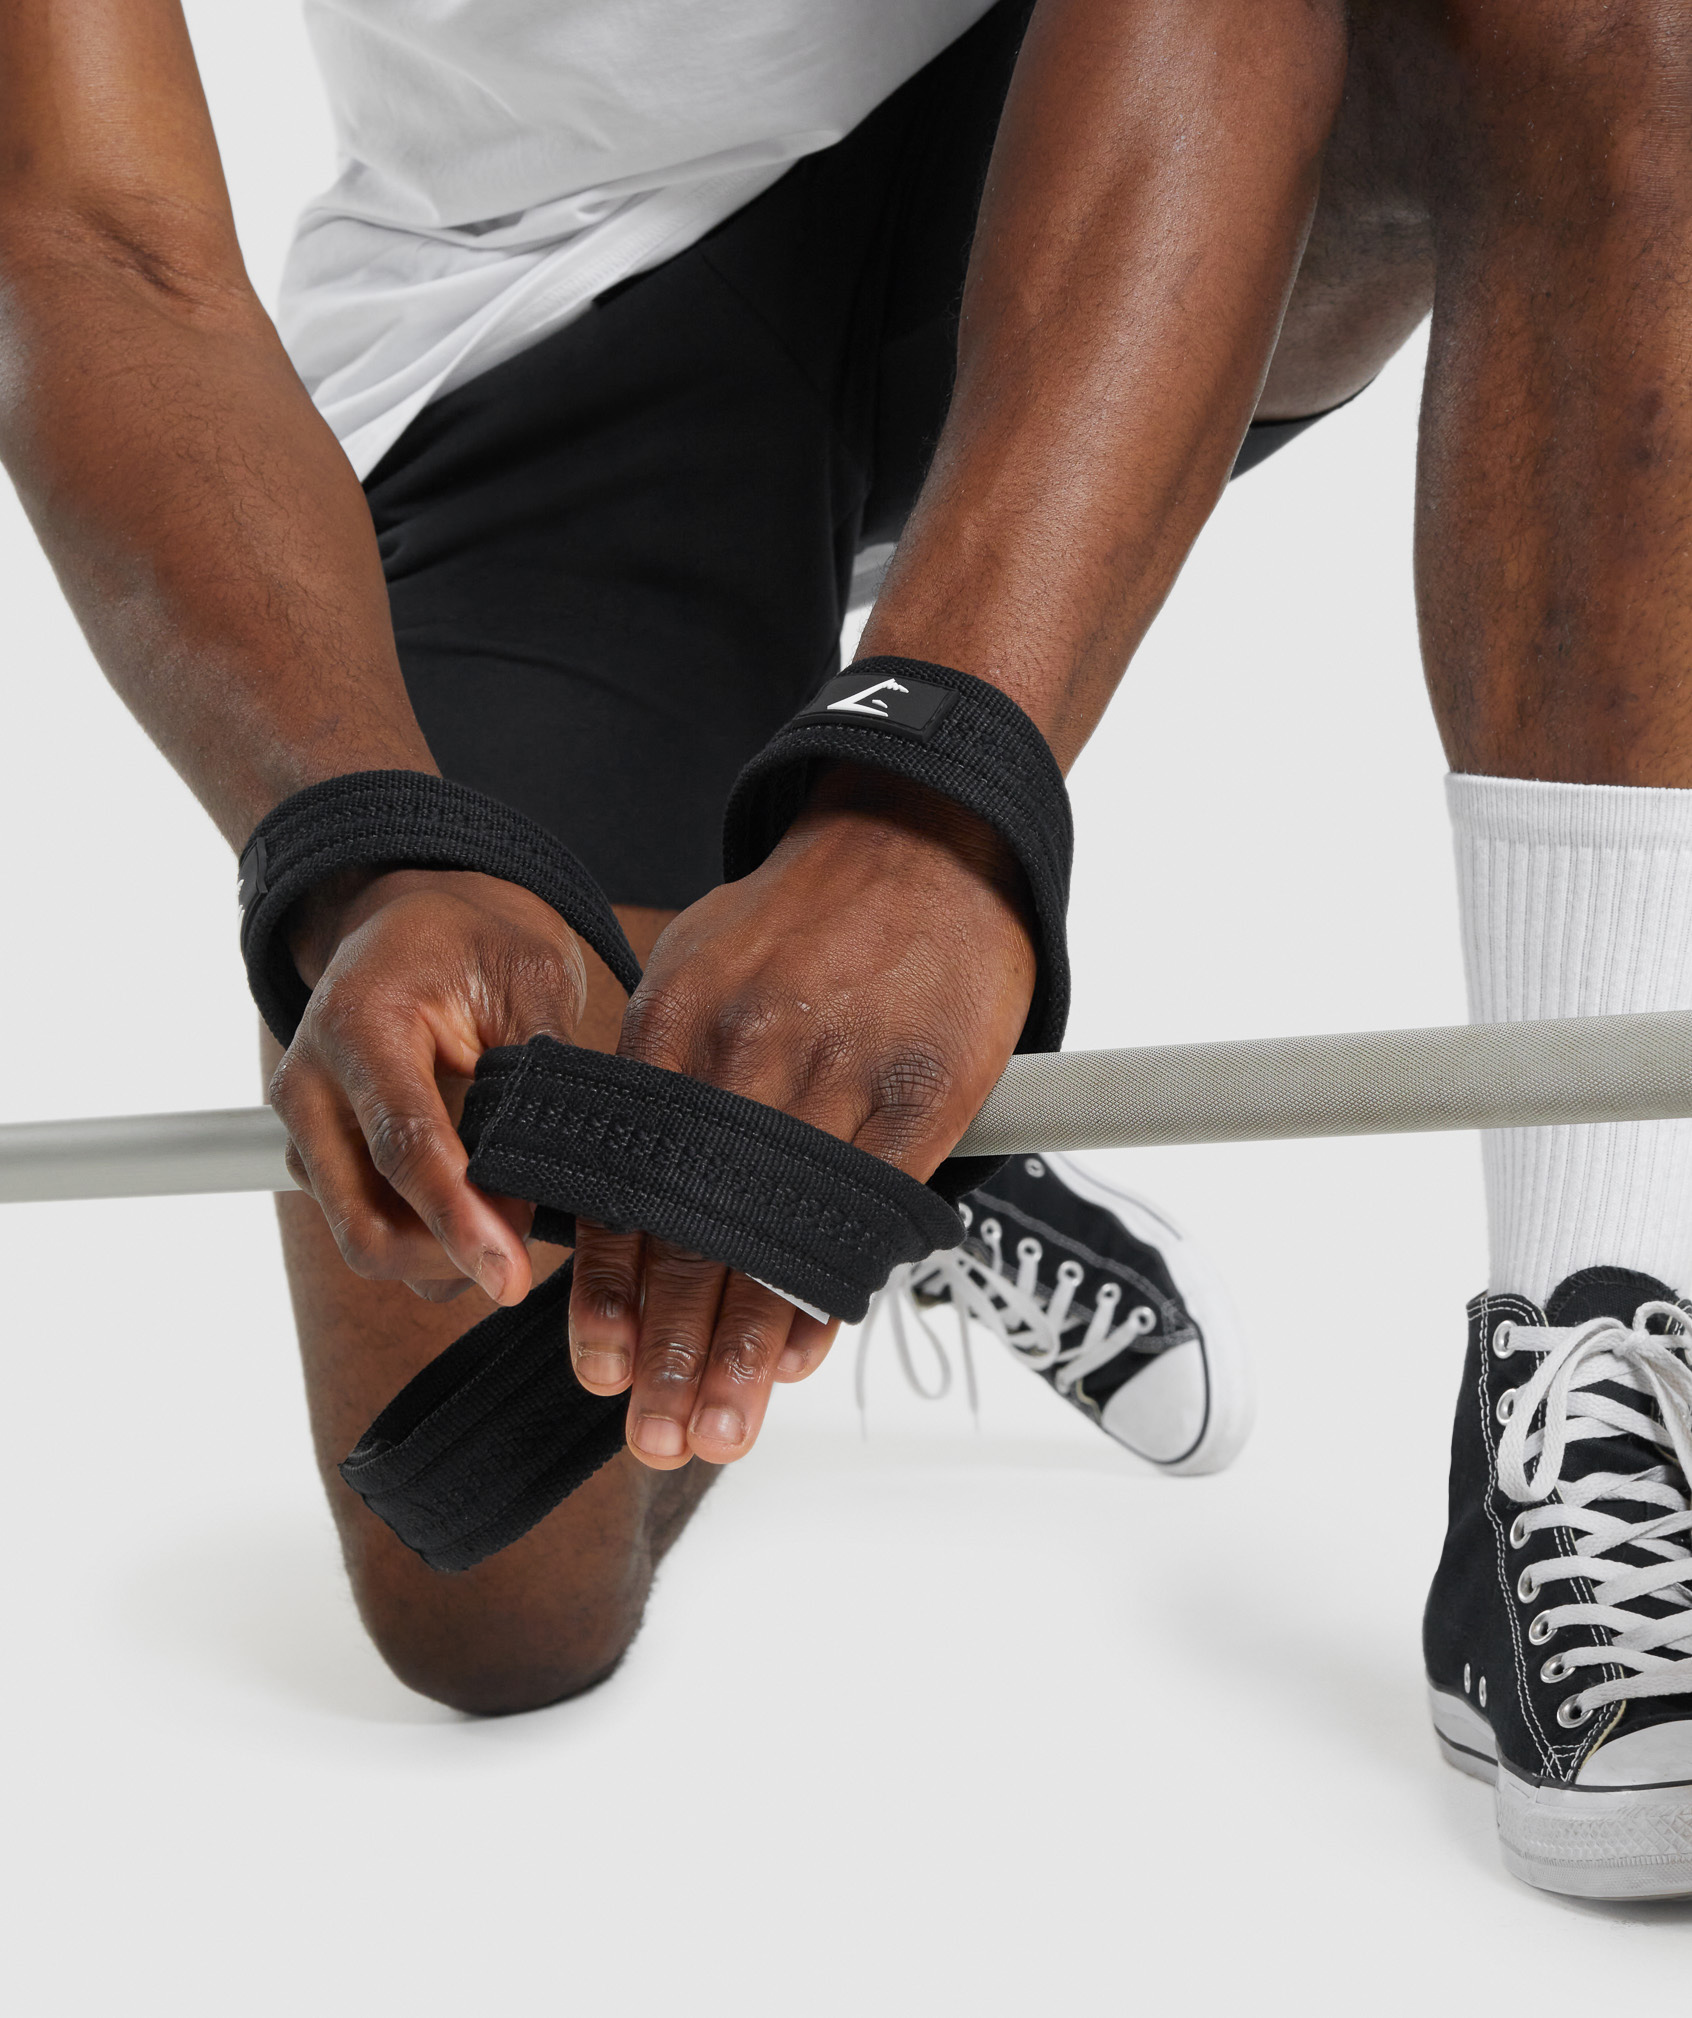 Should You Wear Lifting Straps or Lifting Gloves? – UPPPER Gear